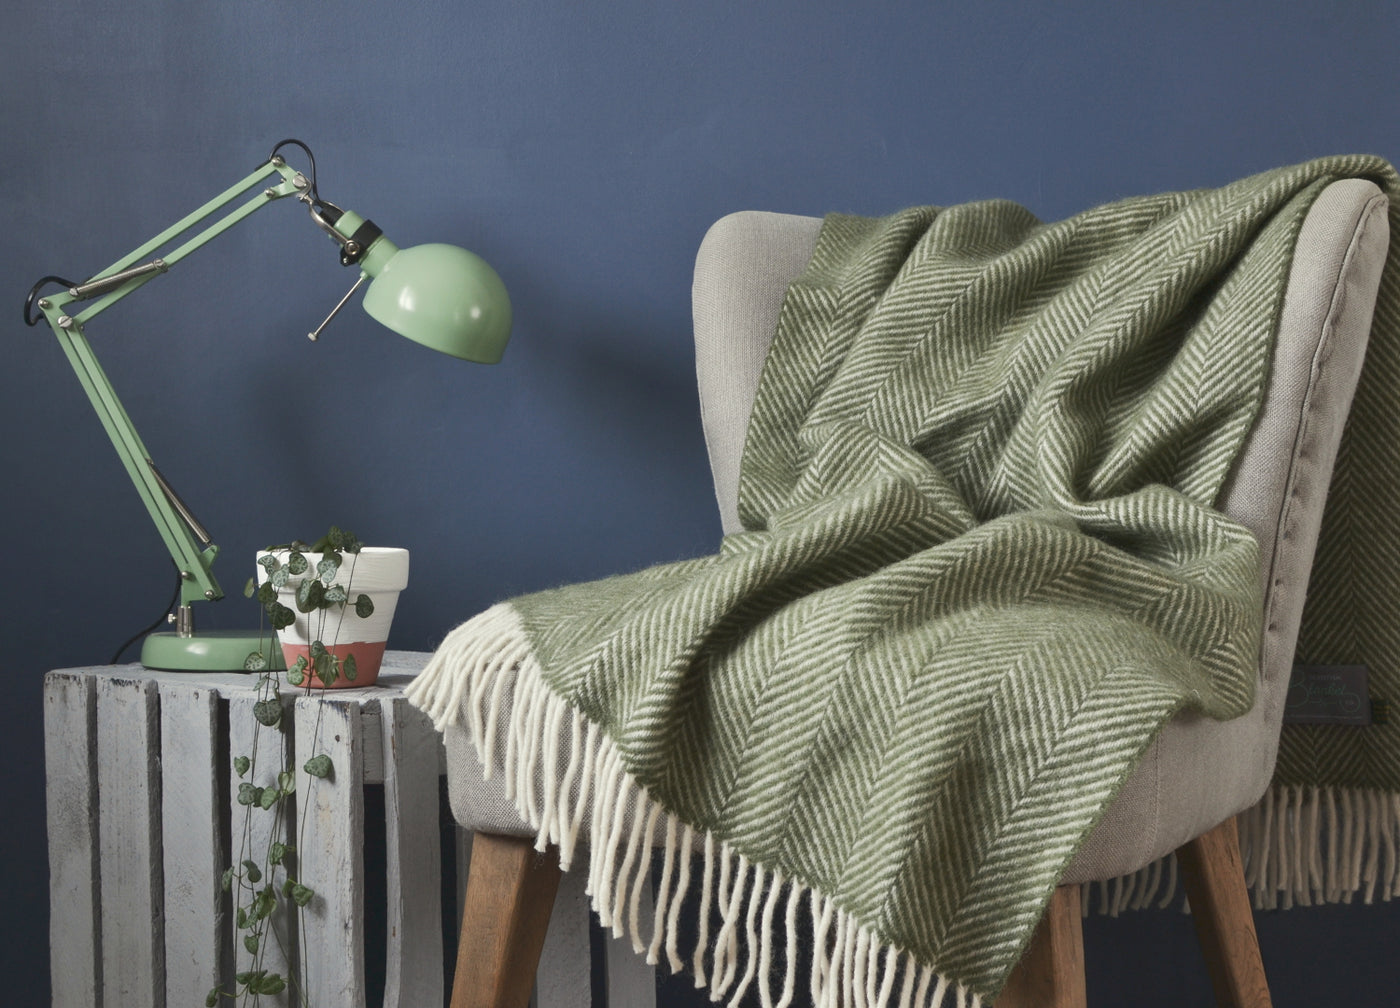 Green herringbone wool blanket draped over a lounge chair on the right. A table lamp and plant pot are on a wooden crate on the left.